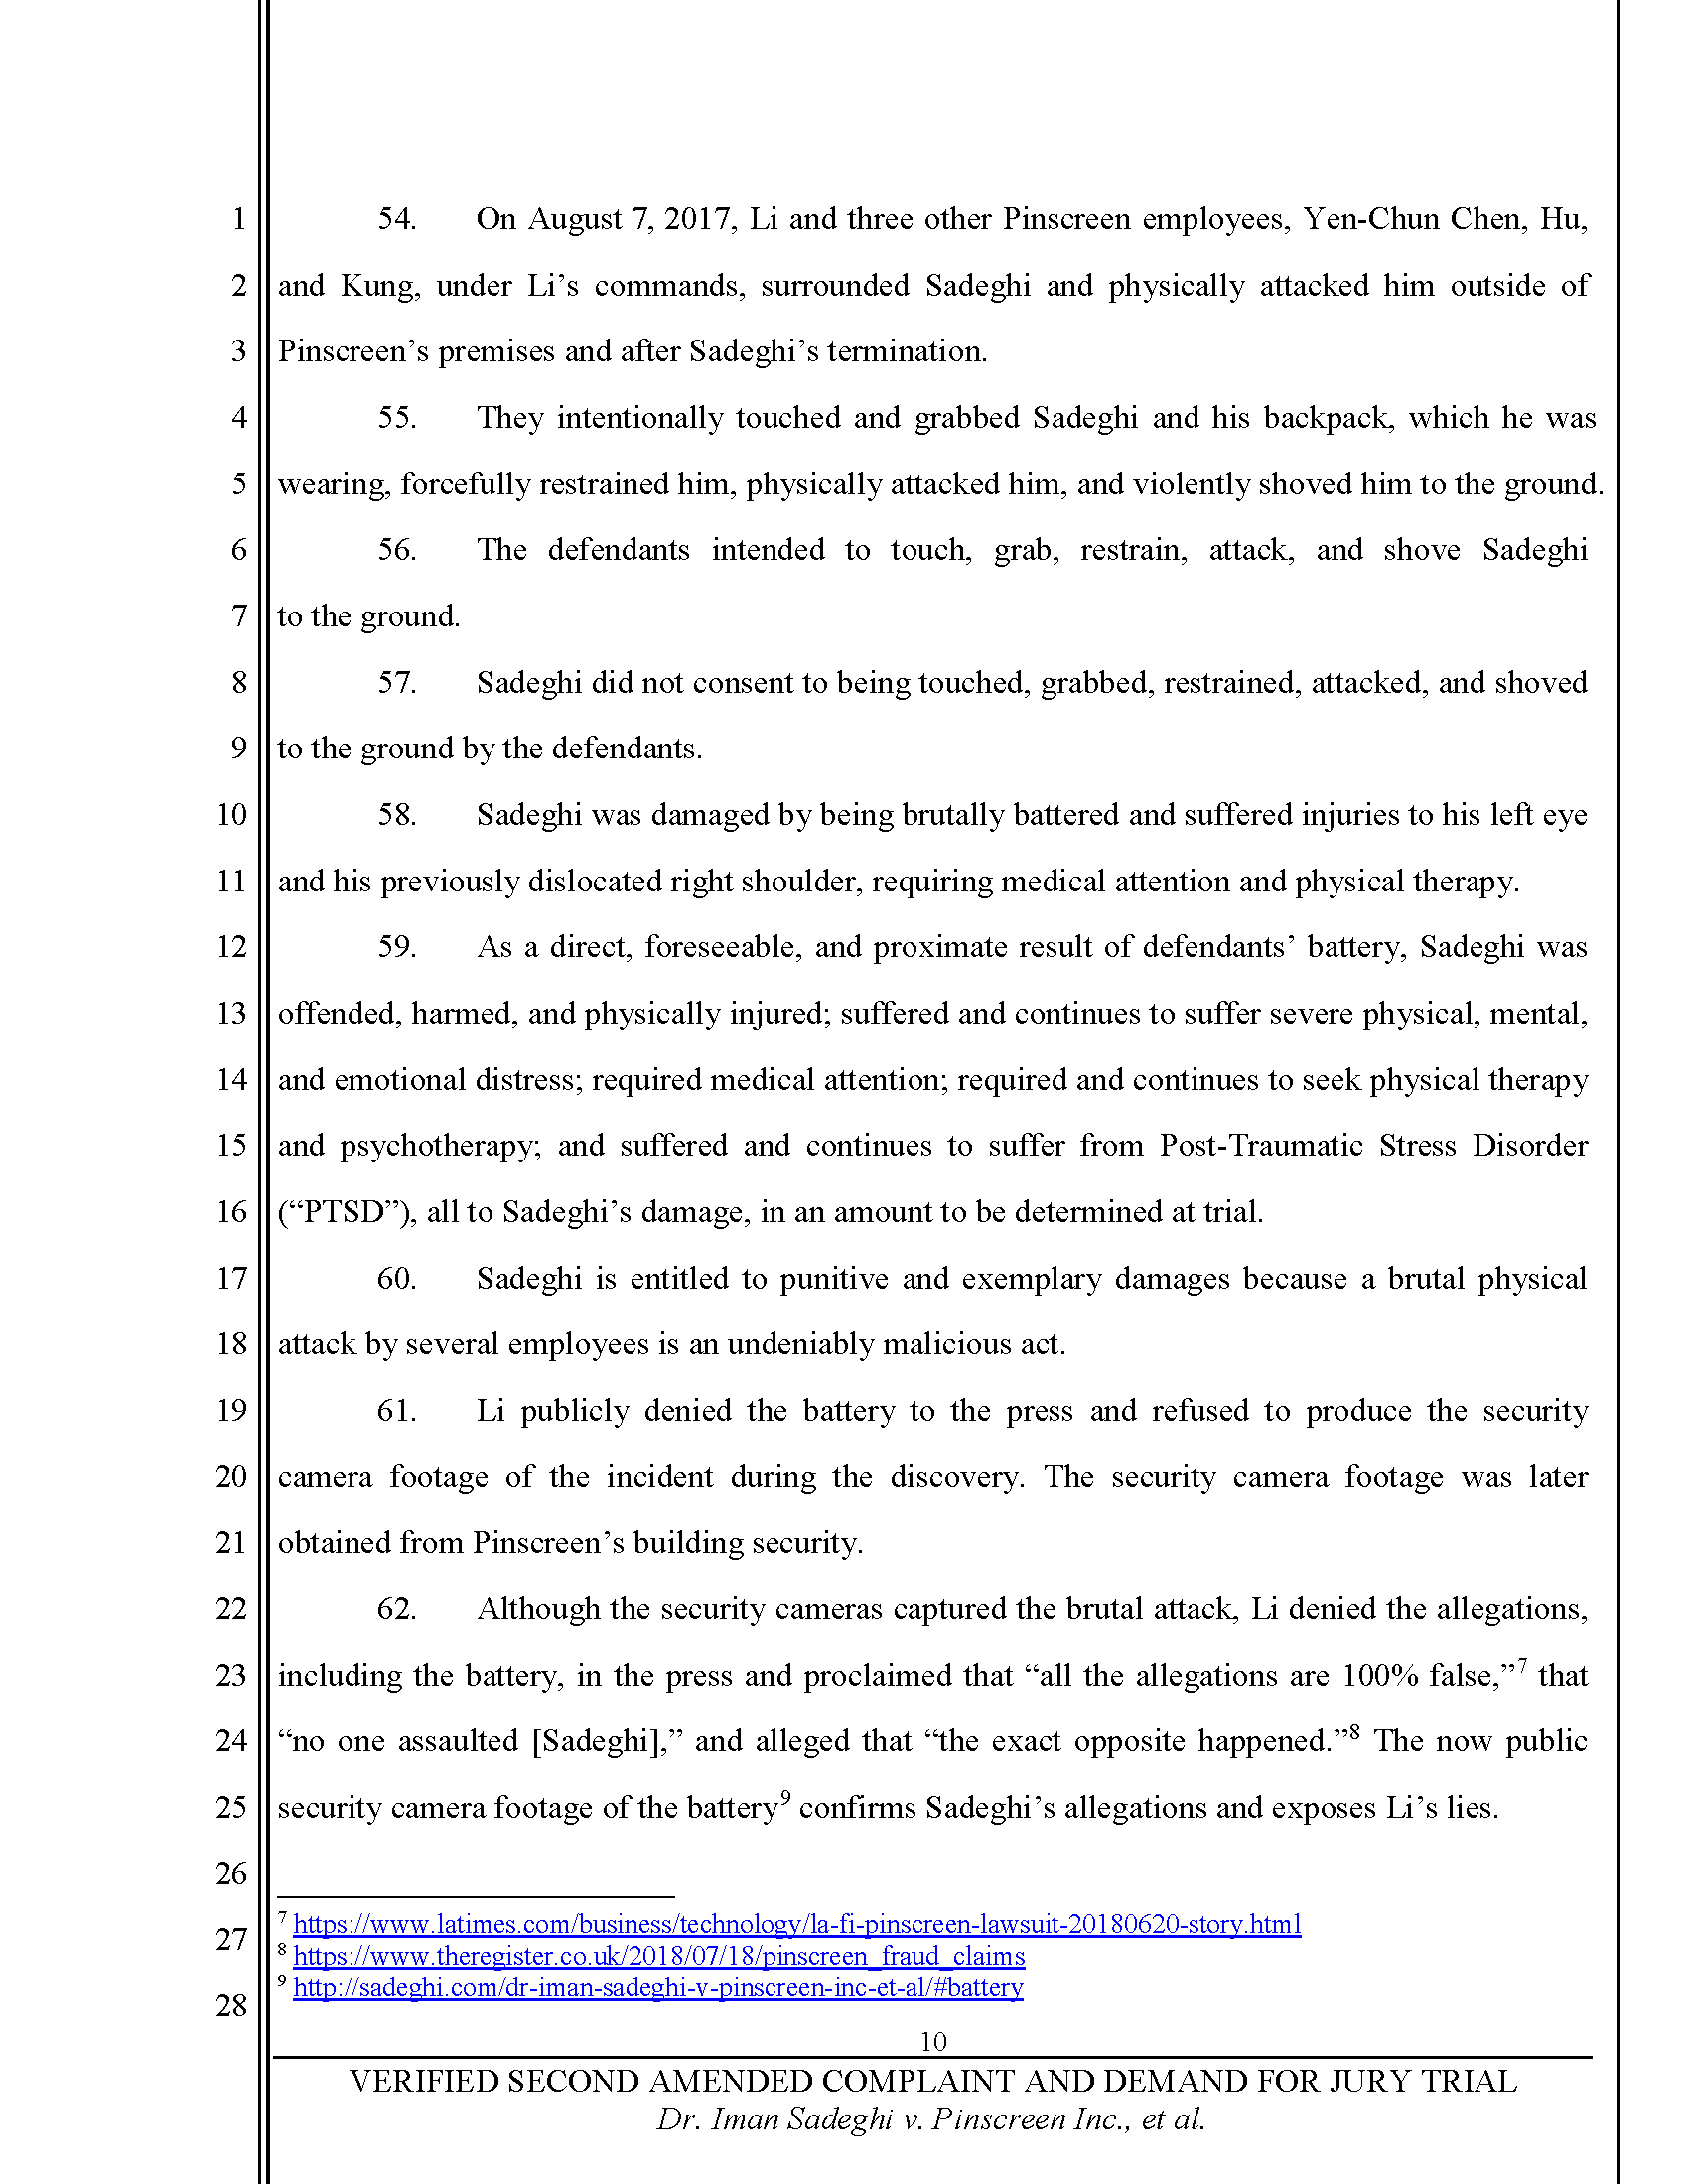 Second Amended Complaint (SAC) Page 11